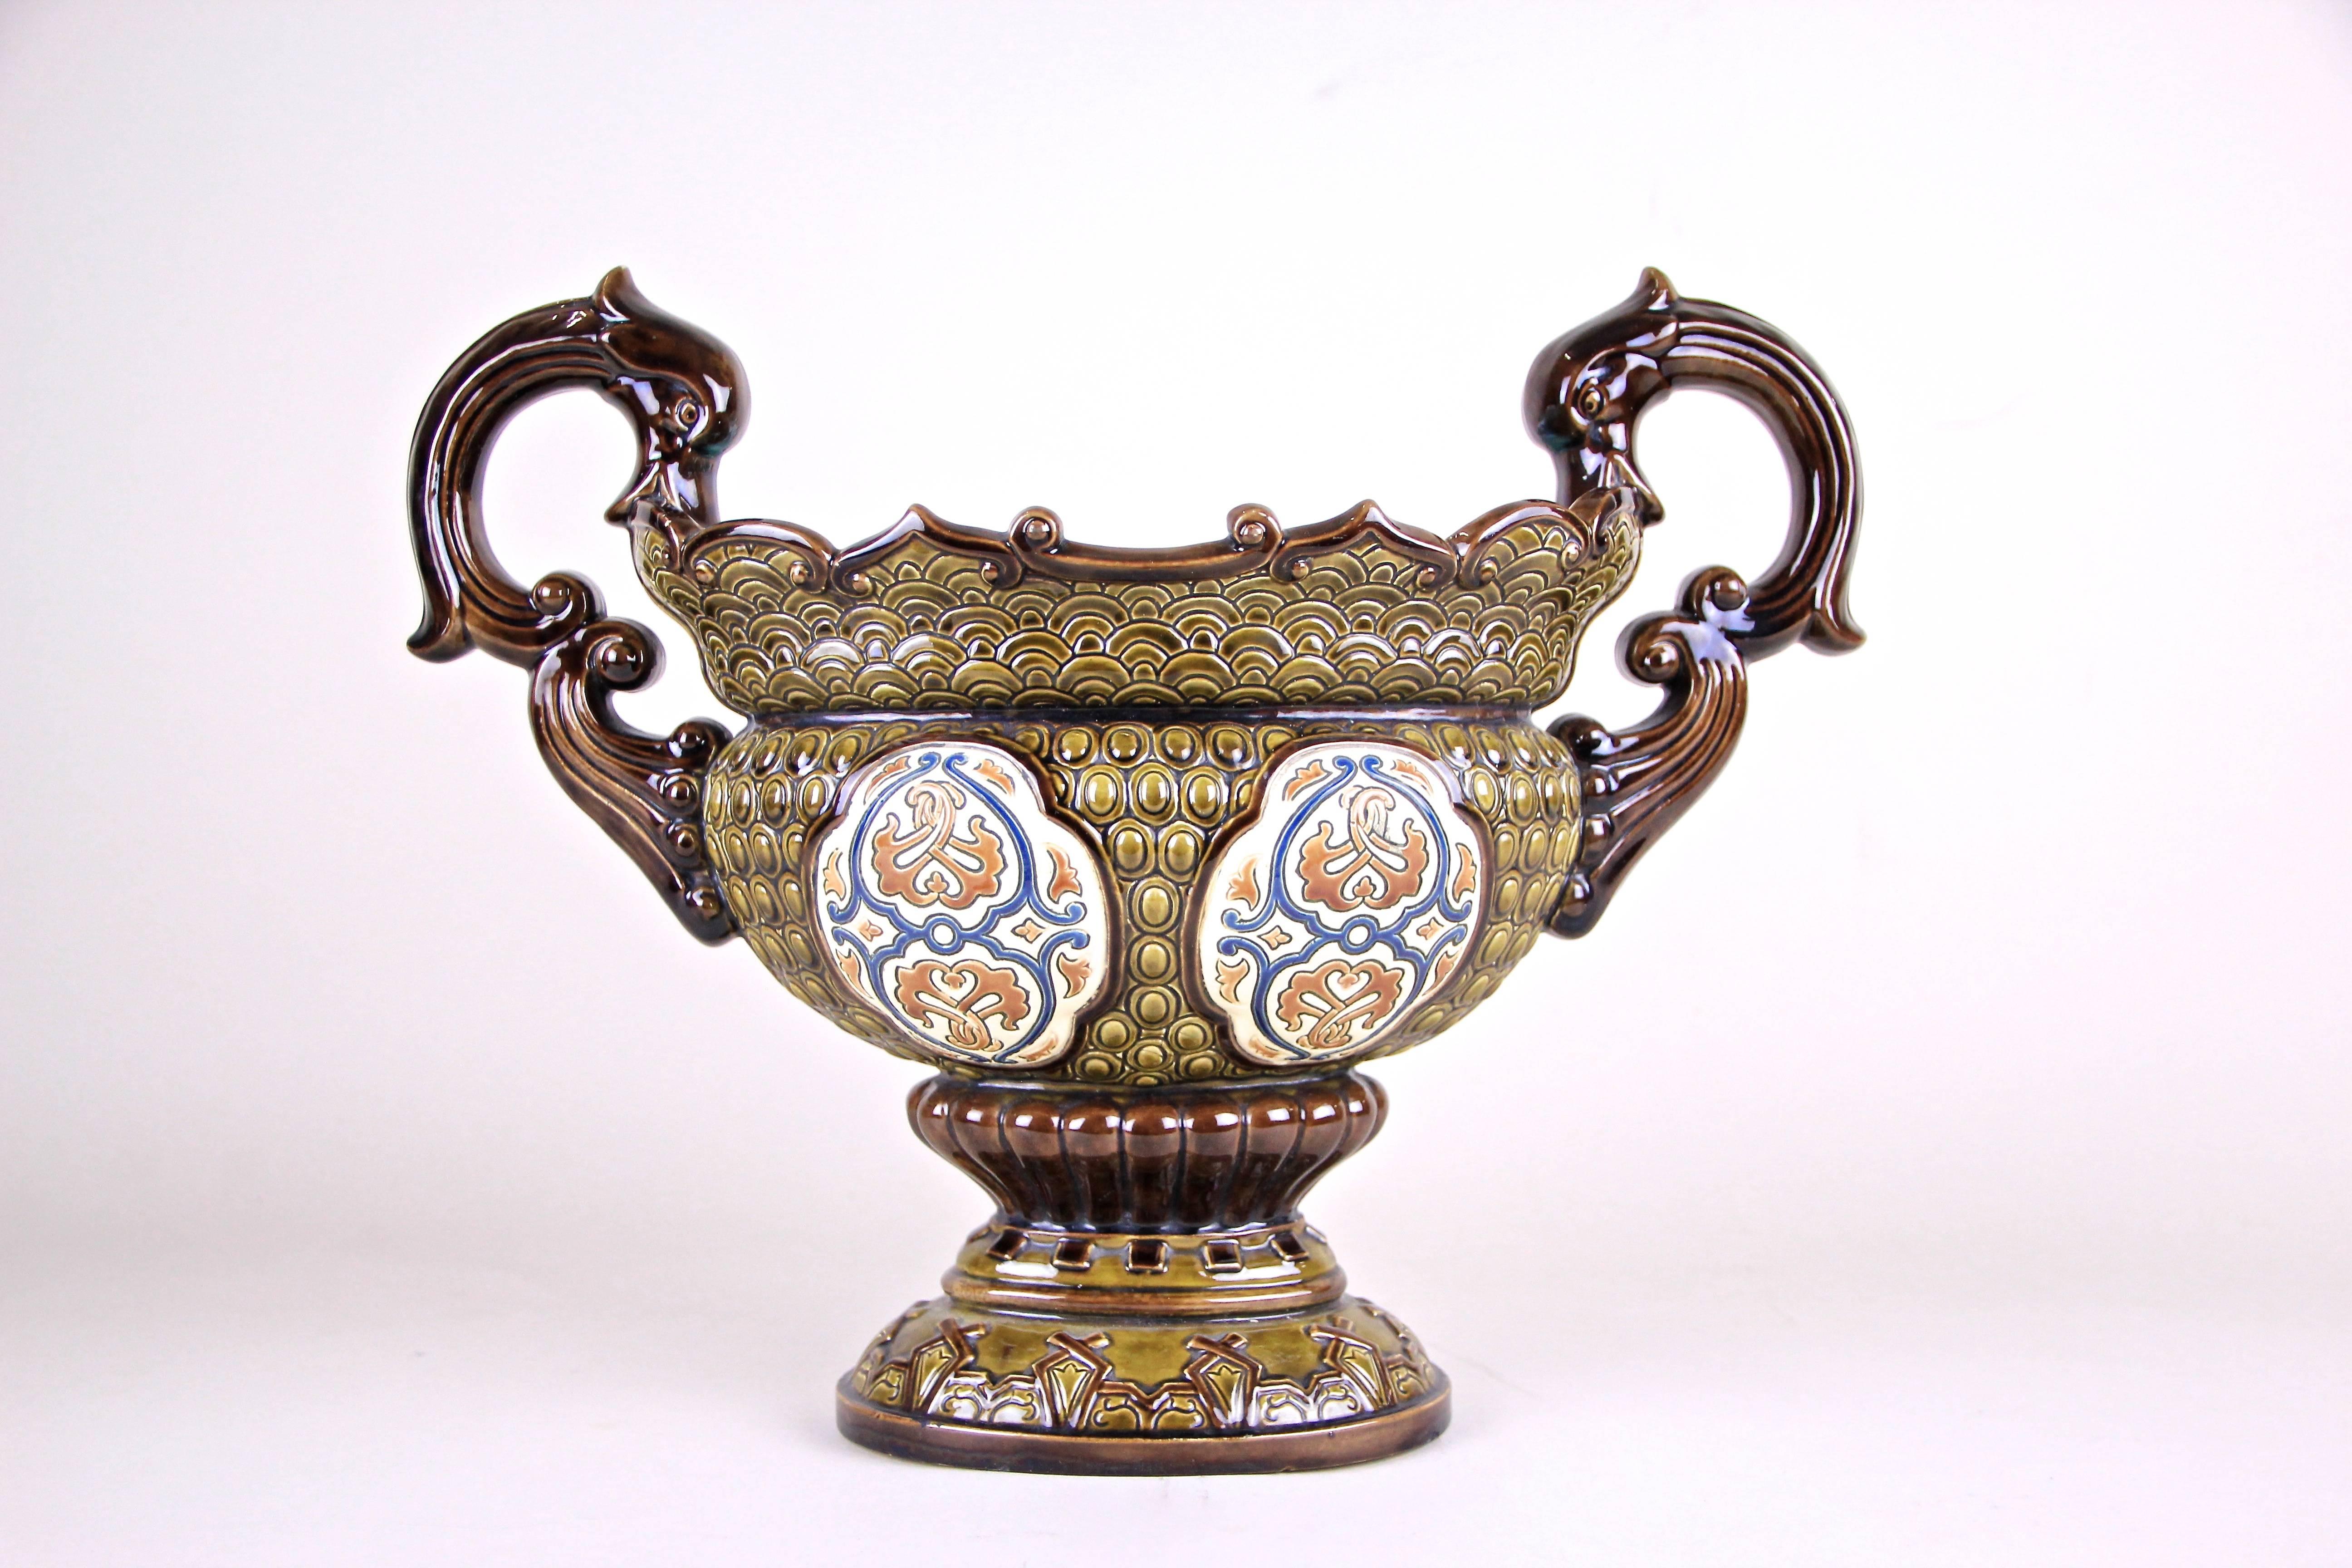 This beautiful Majolica Jardinière by Gerbing & Stephan comes with an amazing worked design and was produced by in the famous ceramic/ majolica manufacturer circa 1890. Beautiful warm earth tones and hand painted applications on both sides are